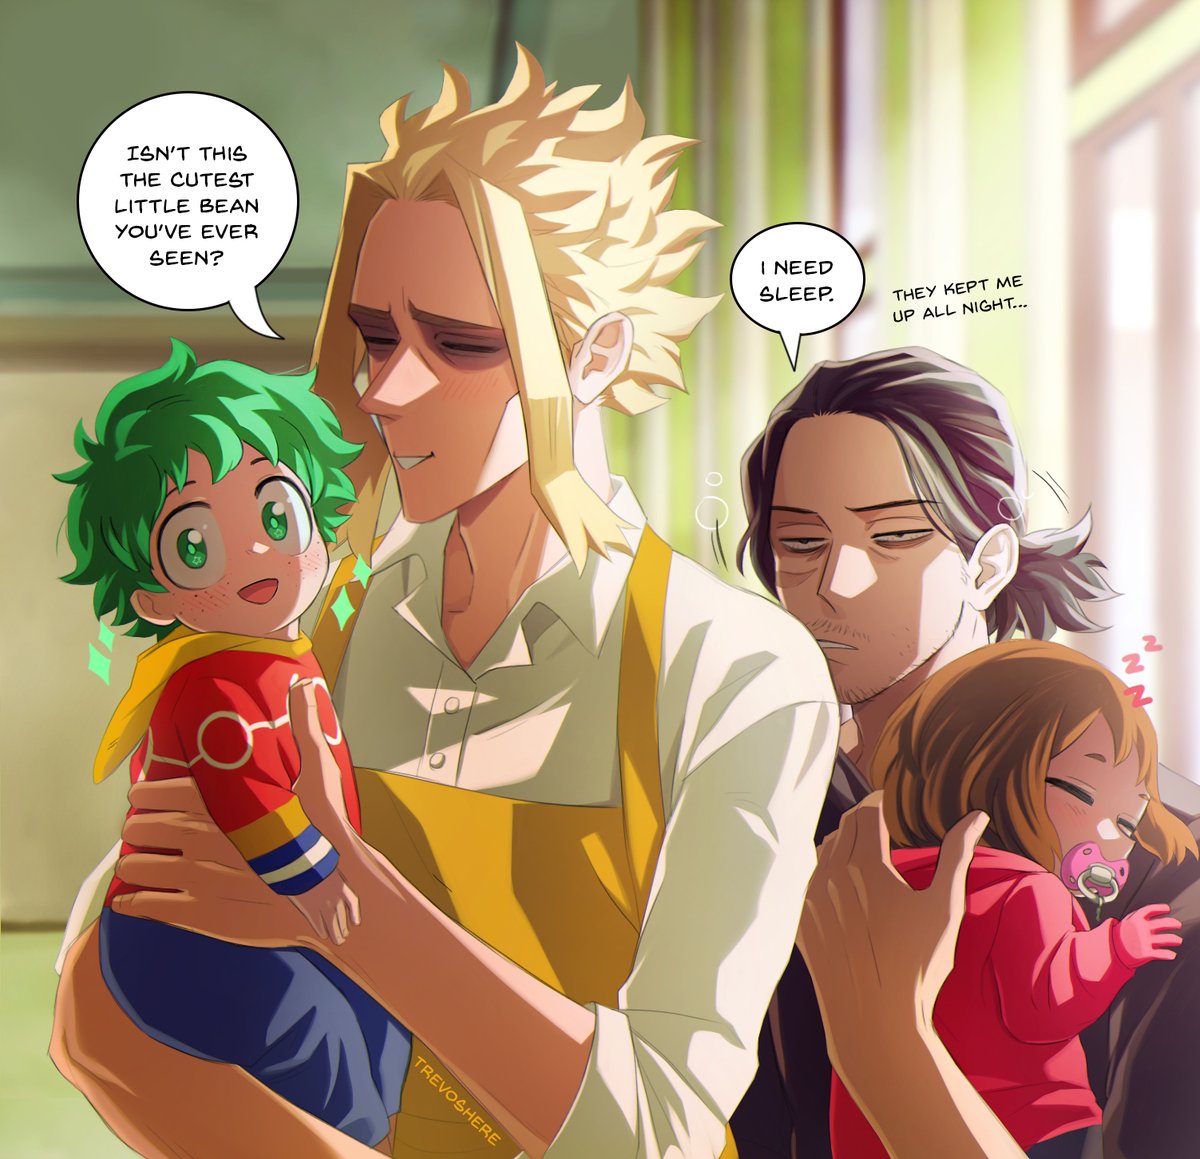 The kids got hit with a baby quirk, but they have the best teacher-dads in the world, so it's ok 🍼 